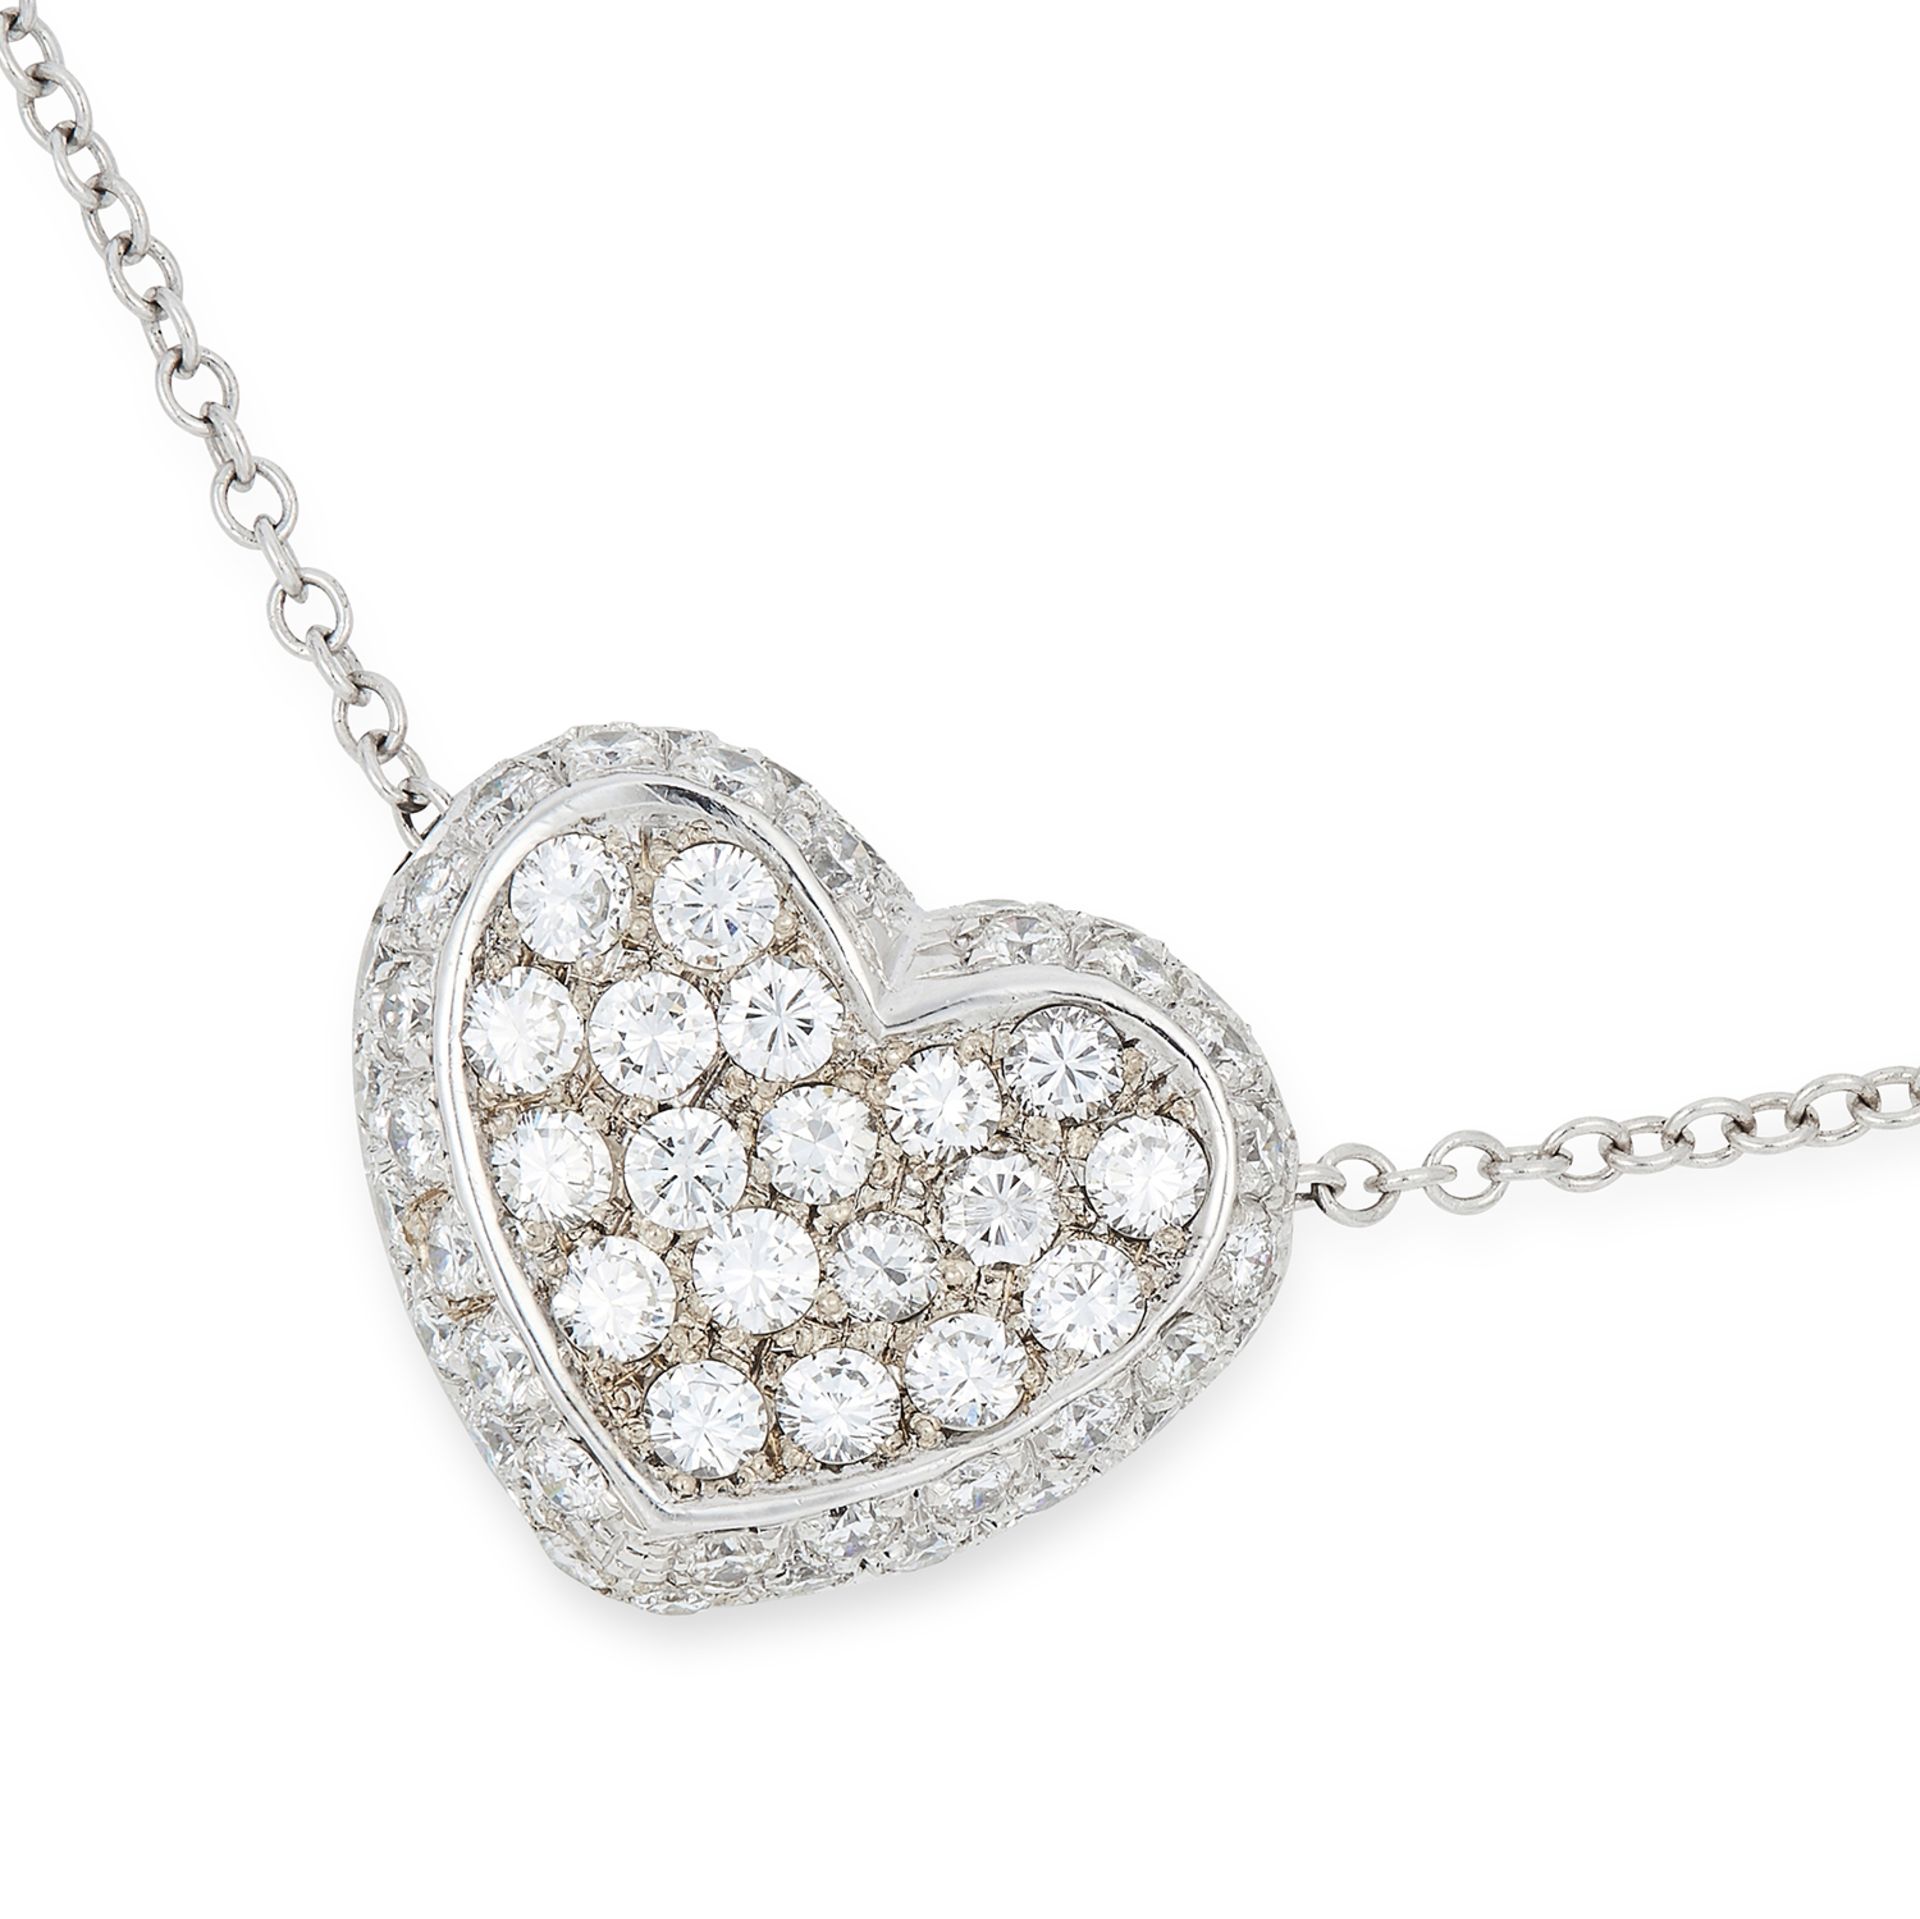 DIAMOND HEART PENDANT AND CHAIN the heart body jewelled with round cut diamonds totalling